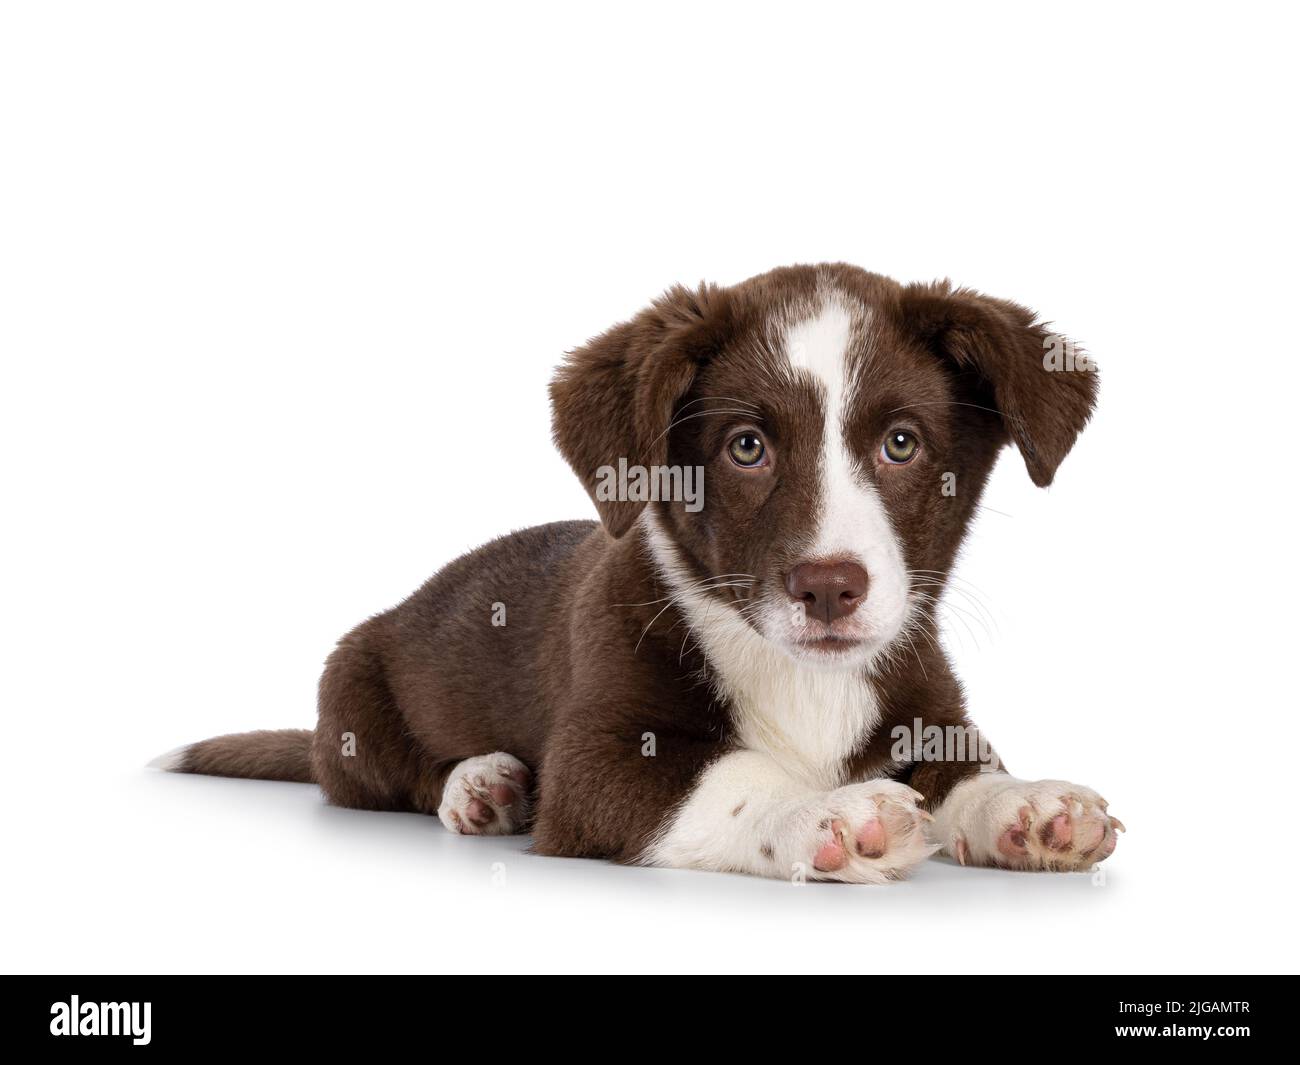 Cute brown with white Welsh Corgi Cardigan dog pup, laying down side ways. Looking straight to camera. Isolated on a white background. Stock Photo